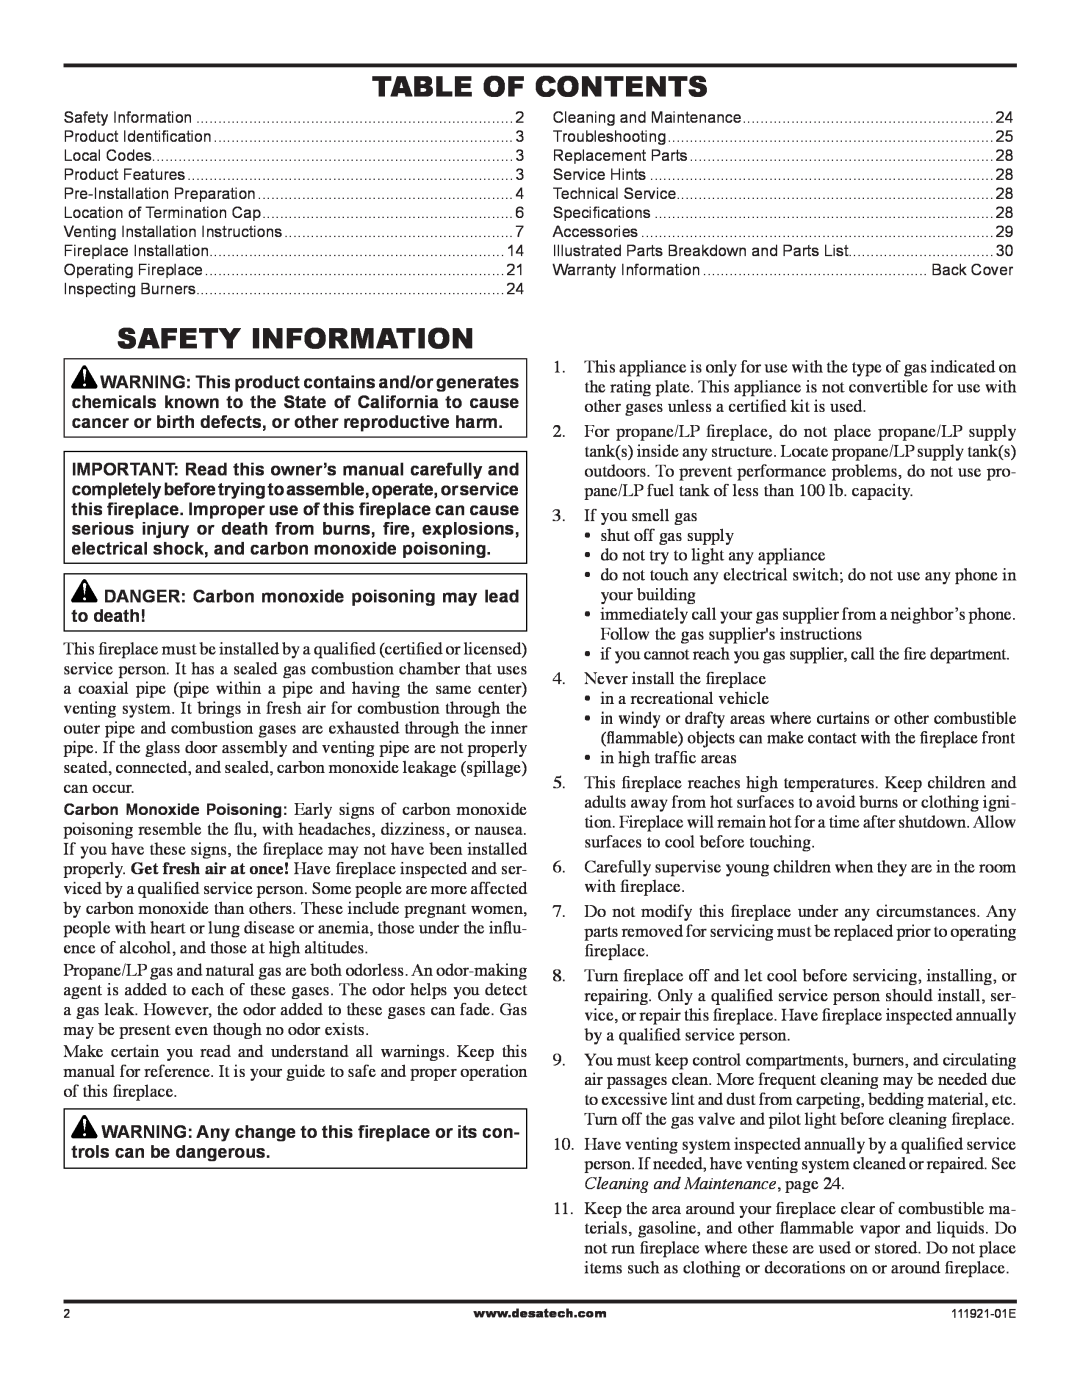 Desa (V)K42P installation manual Table of Contents, Safety Information, Cleaning and Maintenance, page 